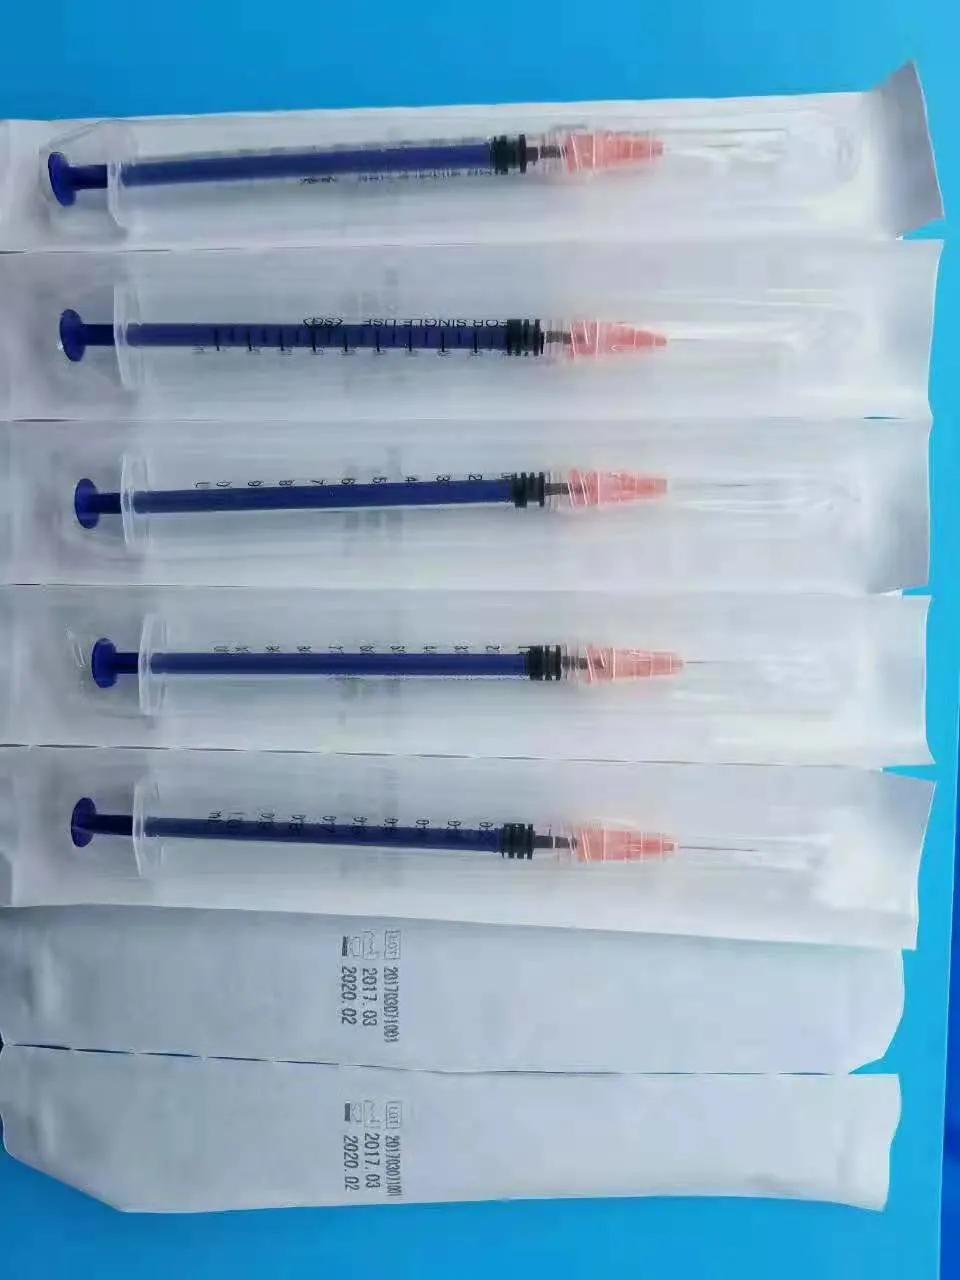 1ml Disposable Syringe Luer Slip with Needle Manufacture with FDA 510K CE&ISO Improved for Vaccine in Stock and Fast Delivery 0.5ml 0.2ml